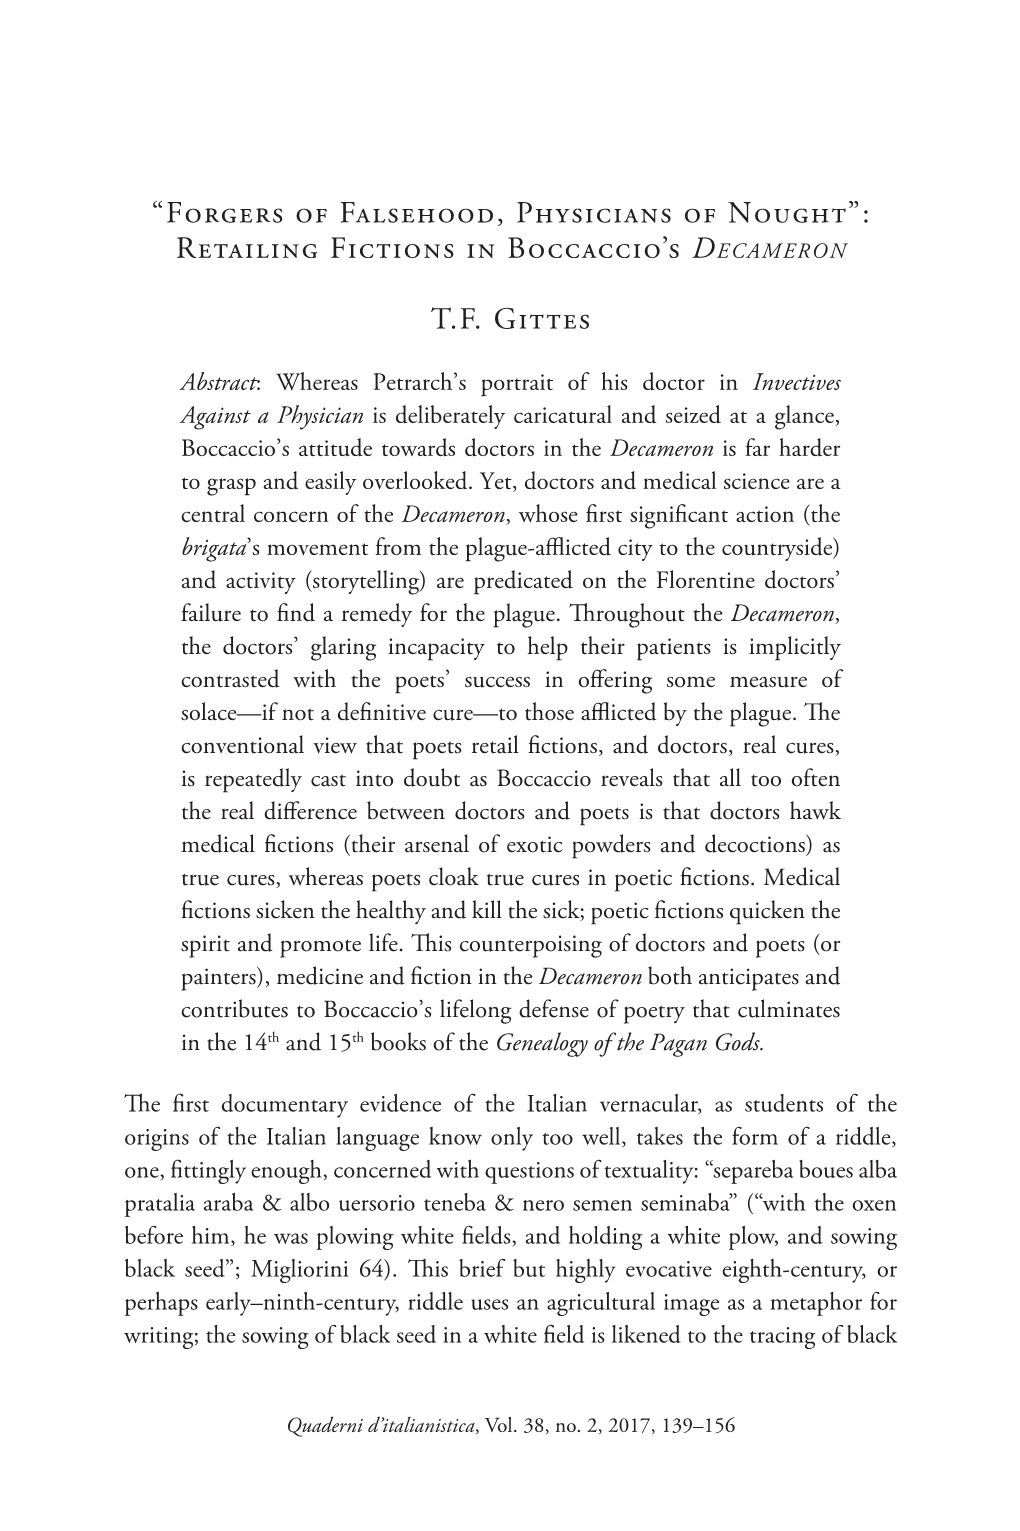 “Forgers of Falsehood, Physicians of Nought”: Retailing Fictions in Boccaccio's Decameron T.F. Gittes